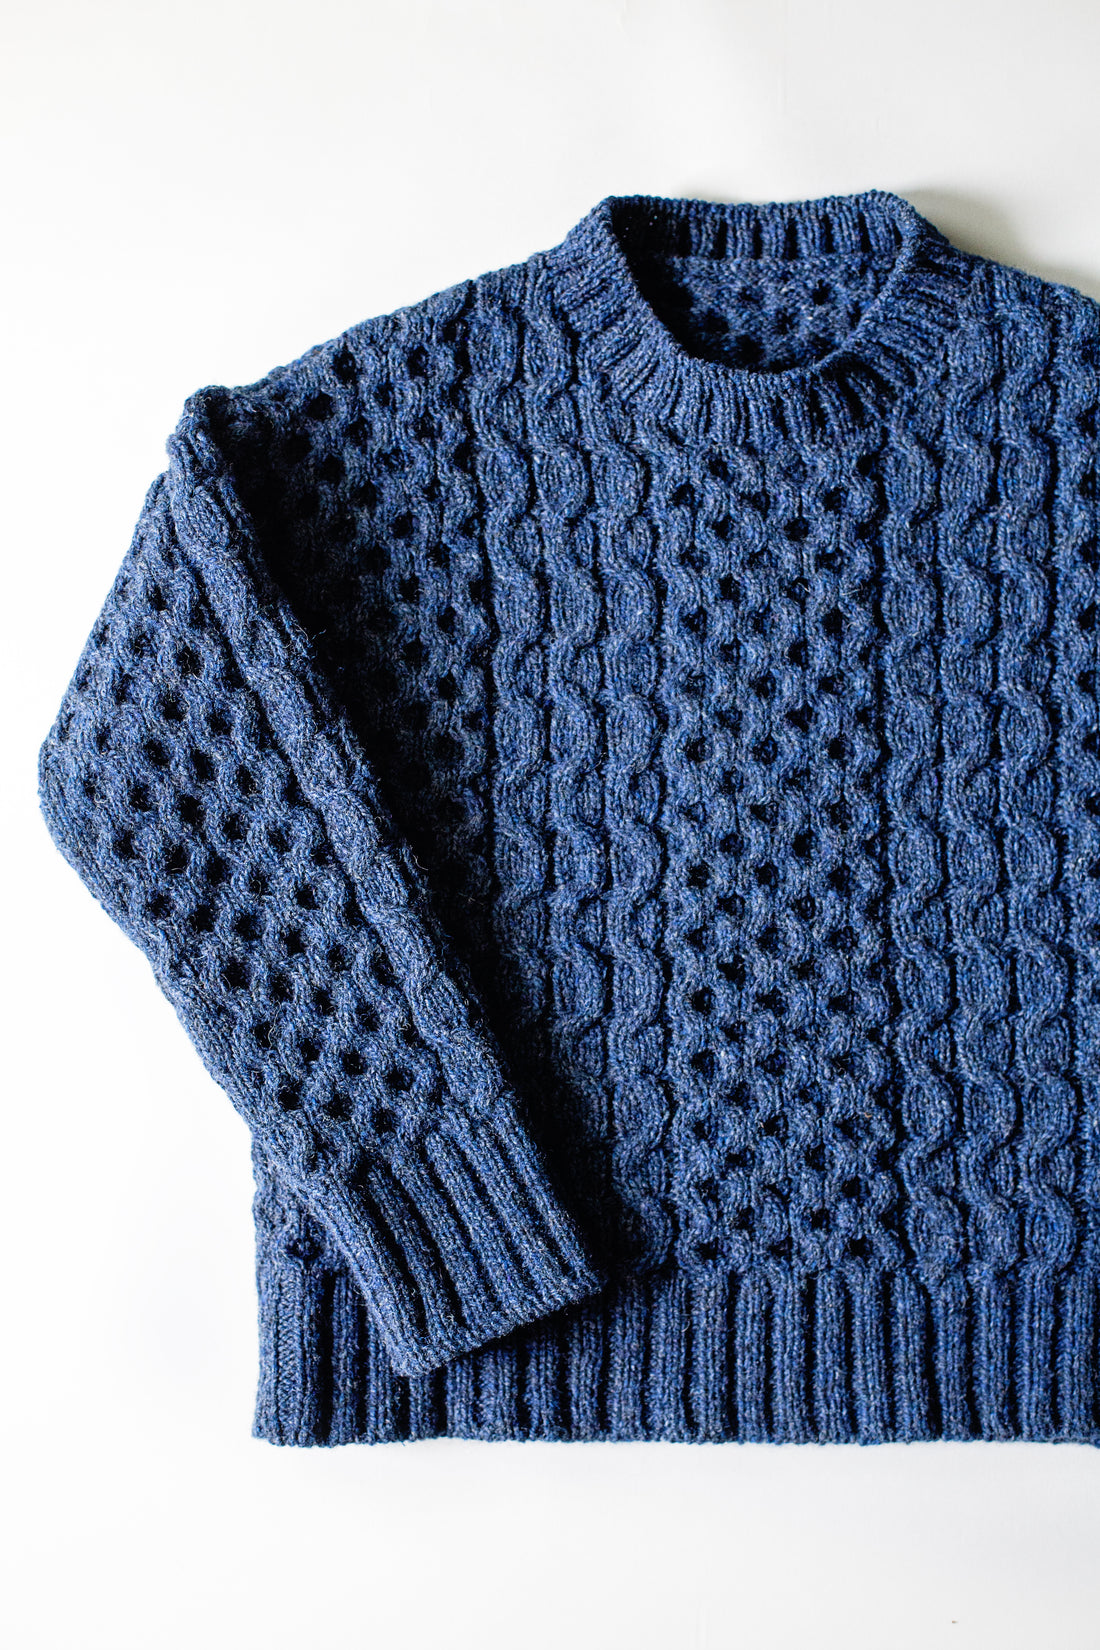 Tayler Anne Knits - The Apiary Sweater kit de laine